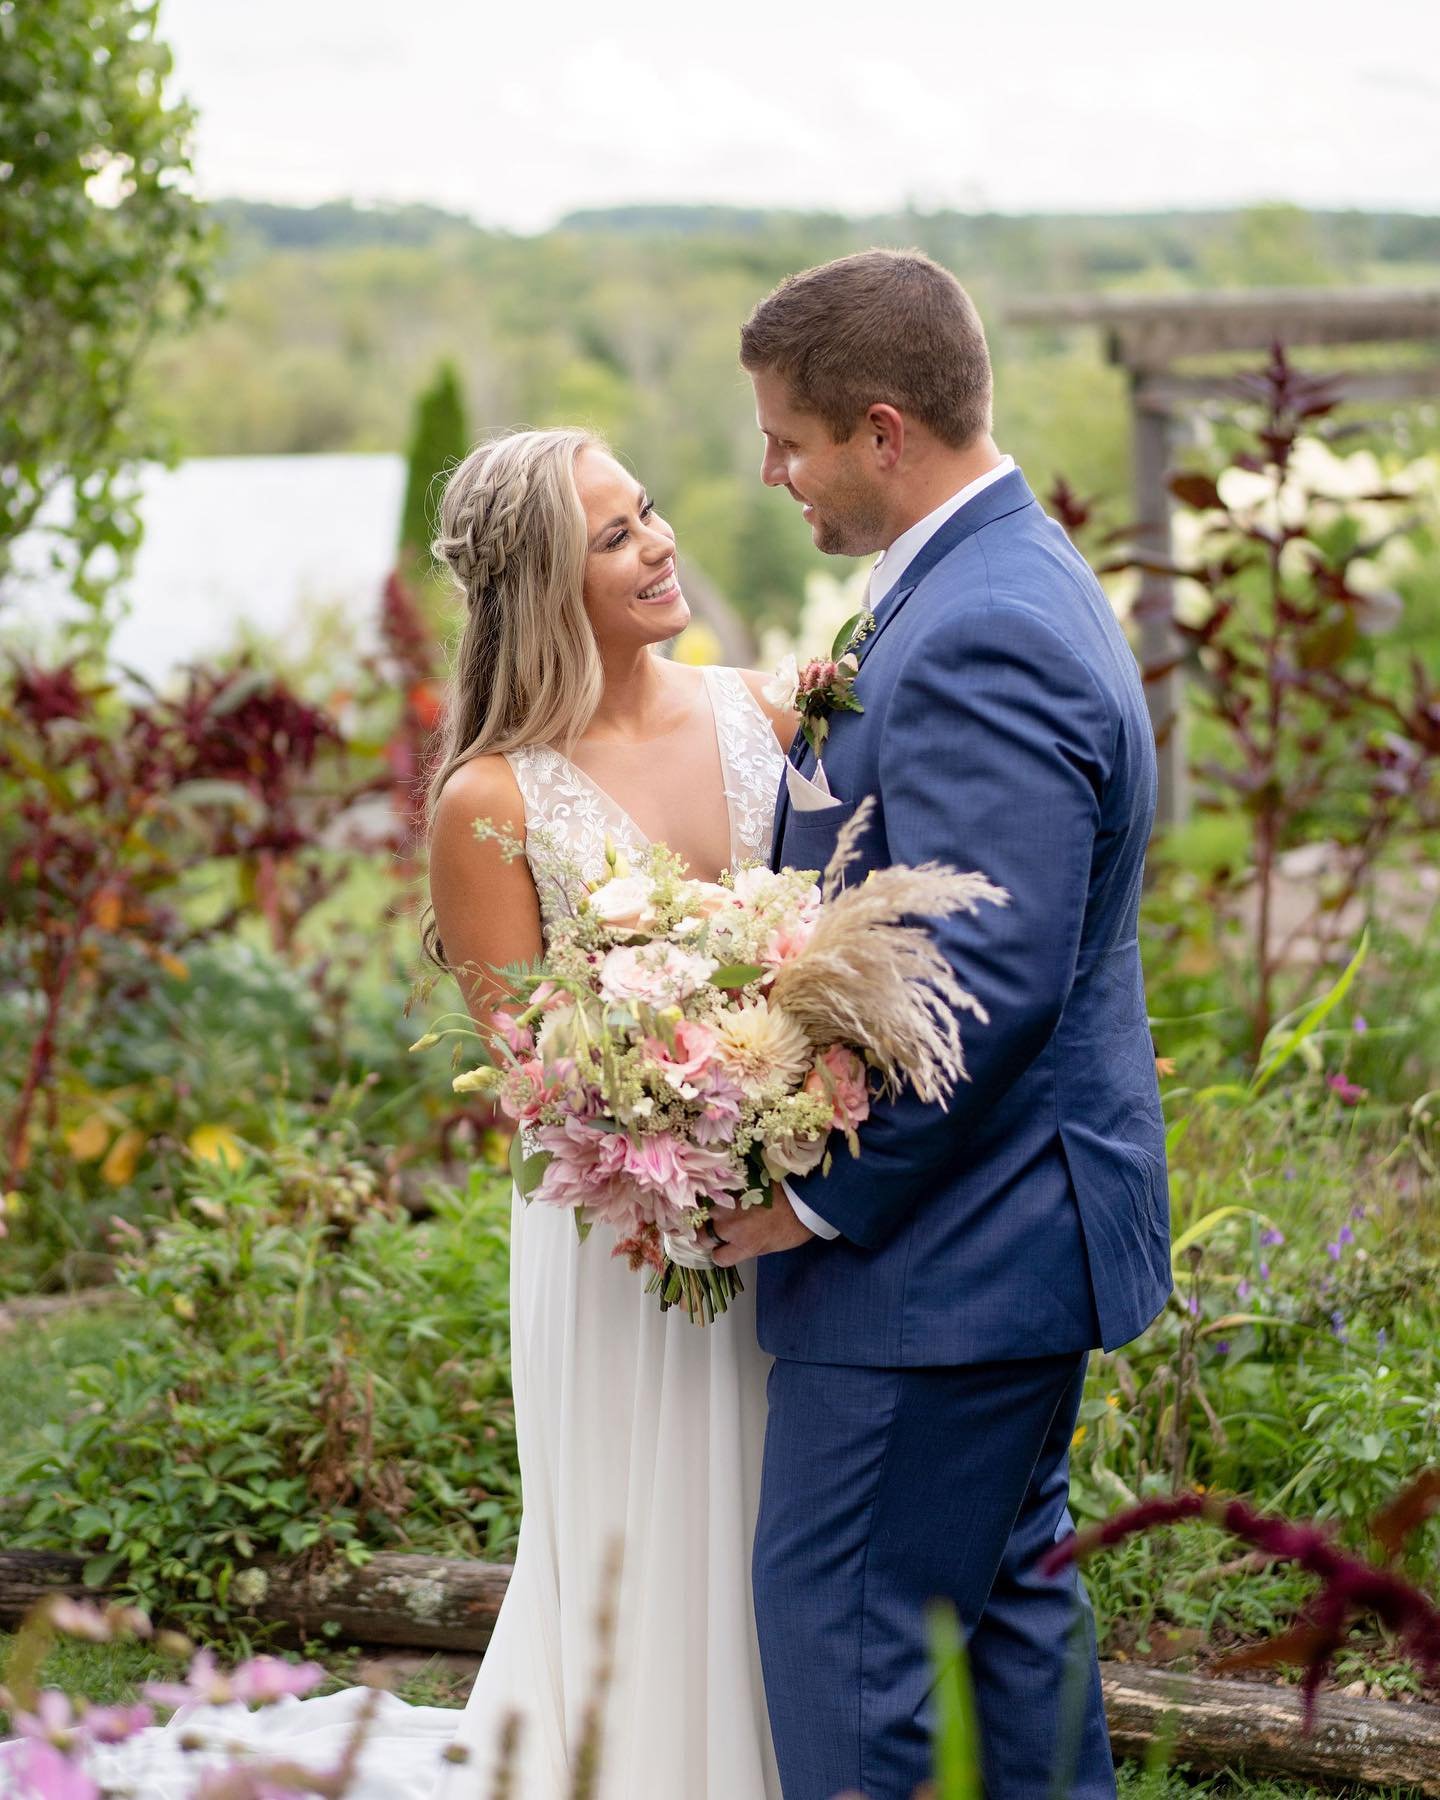 Bride & Groom with Bouquet at Fox Hill Farm Honesdale PA.jpeg